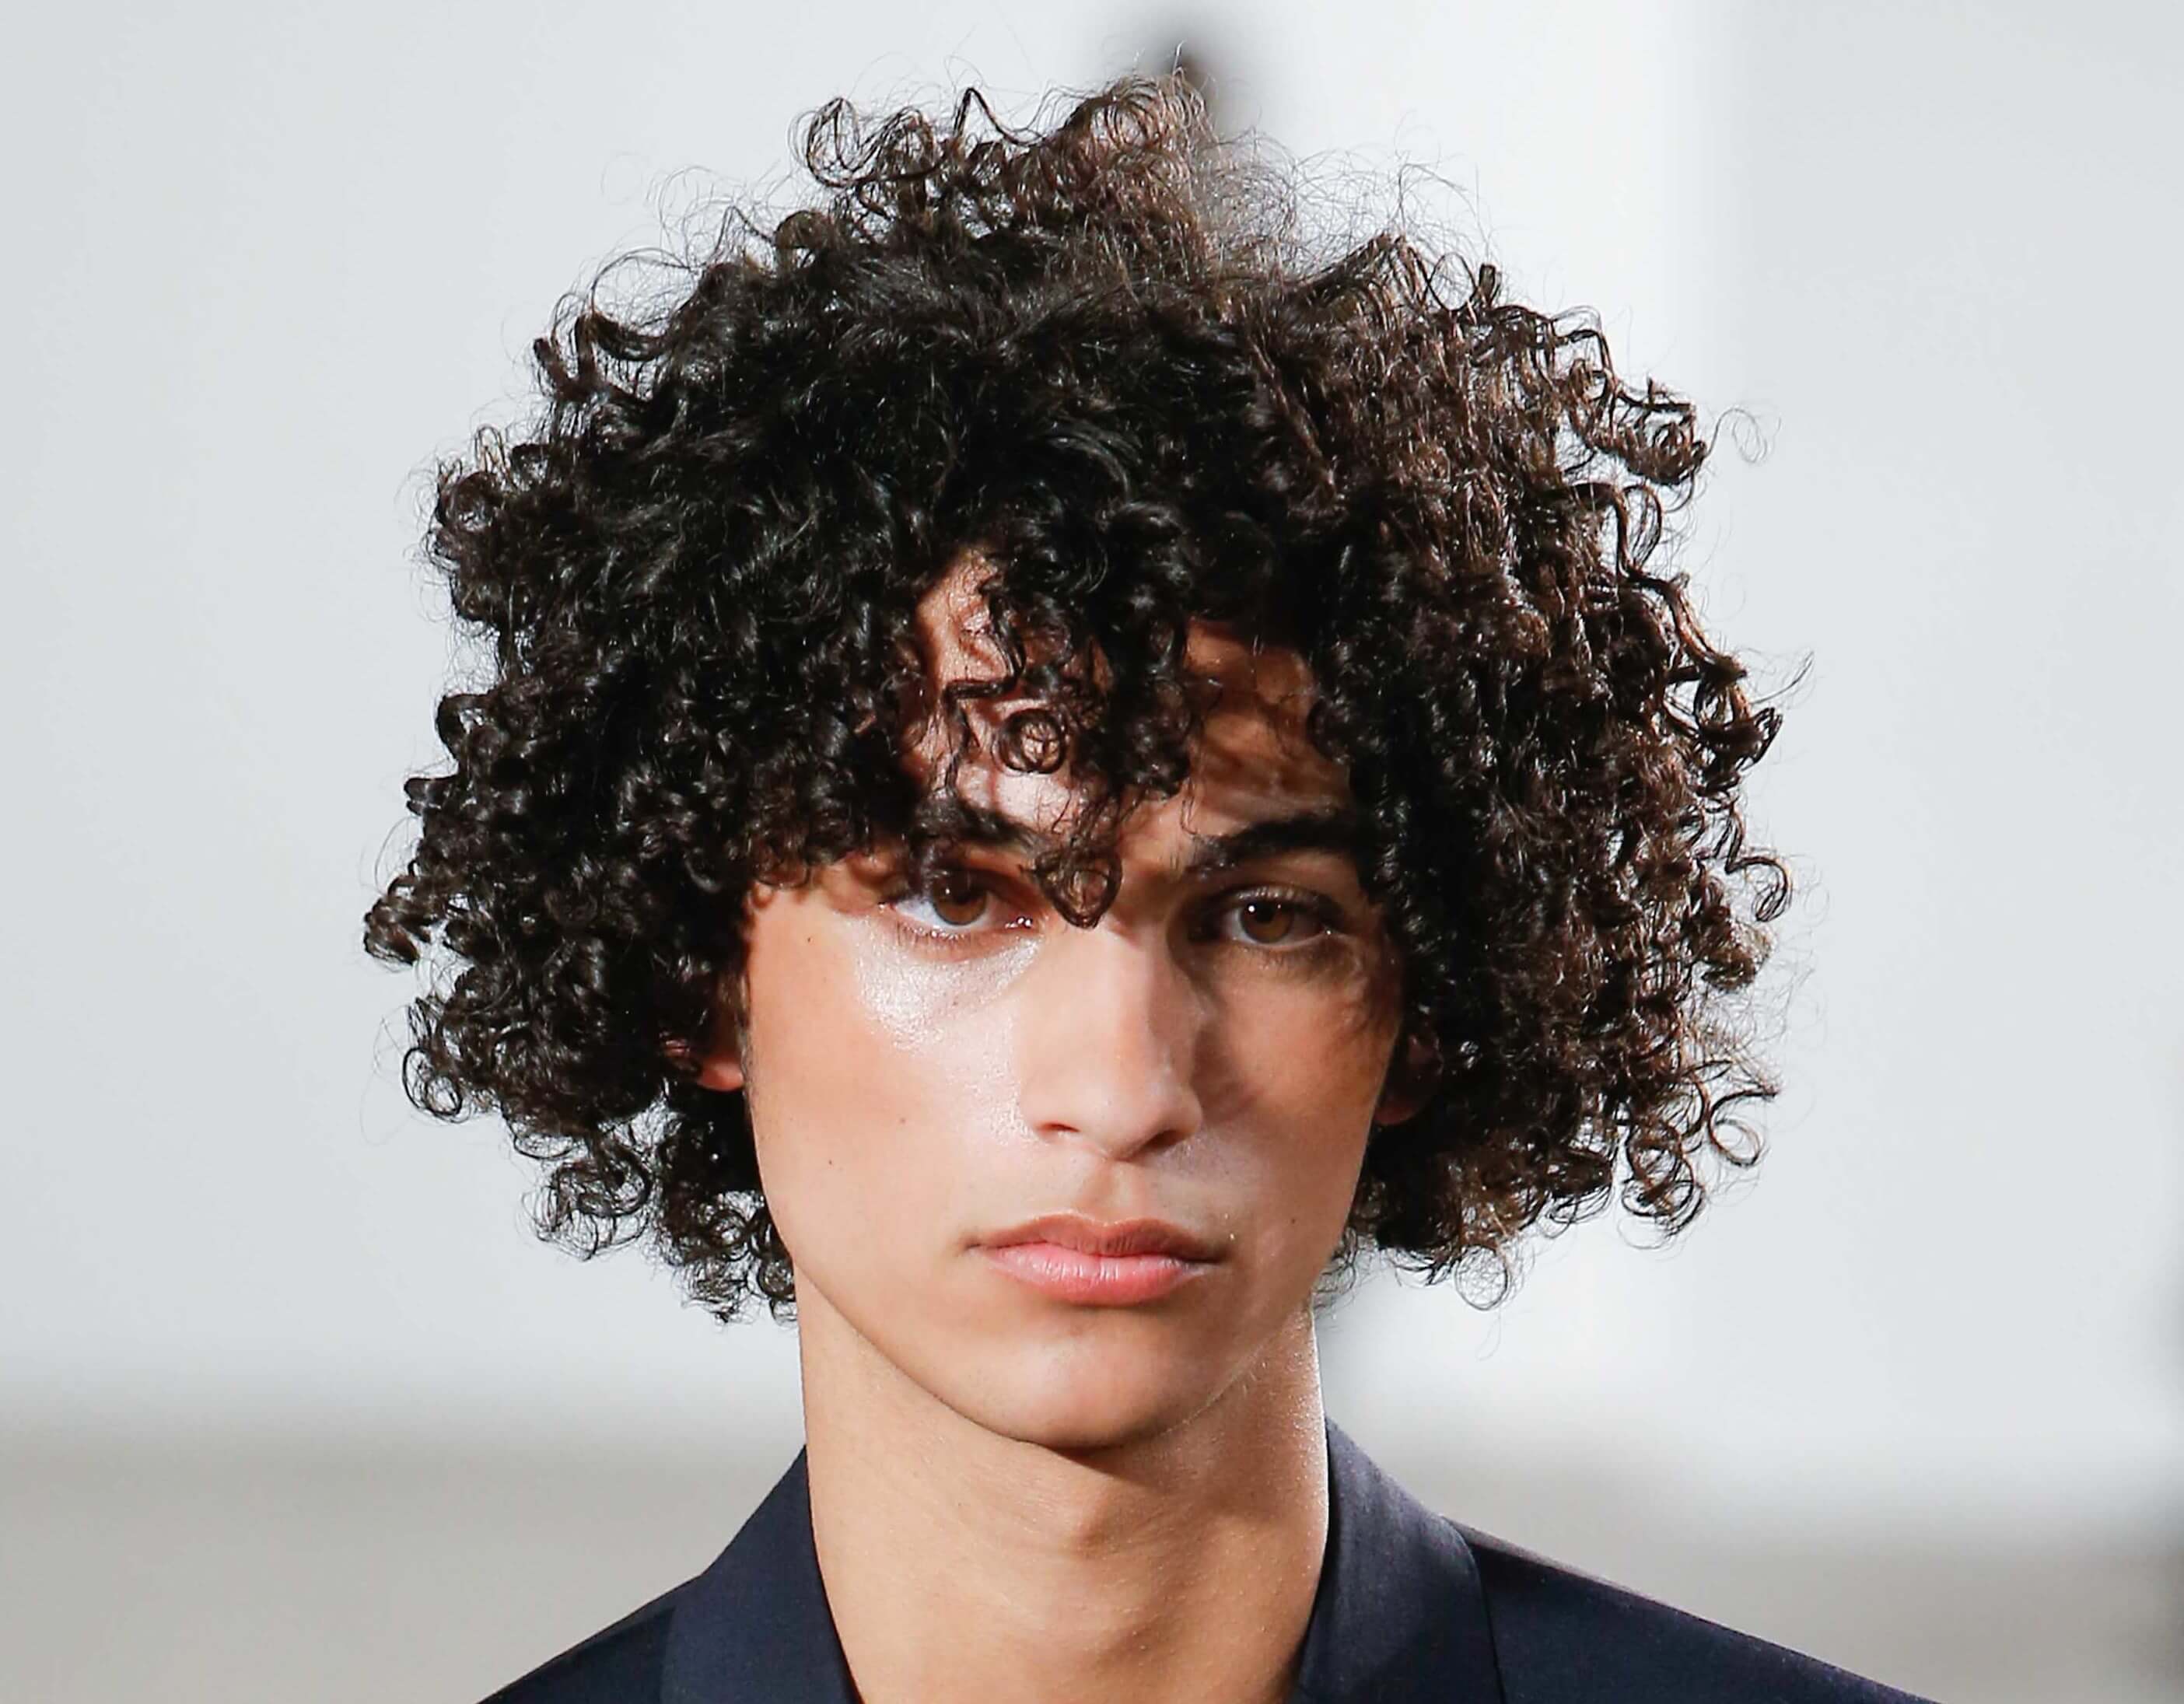 male model on the runway with dark brown curly hair worn long and loose